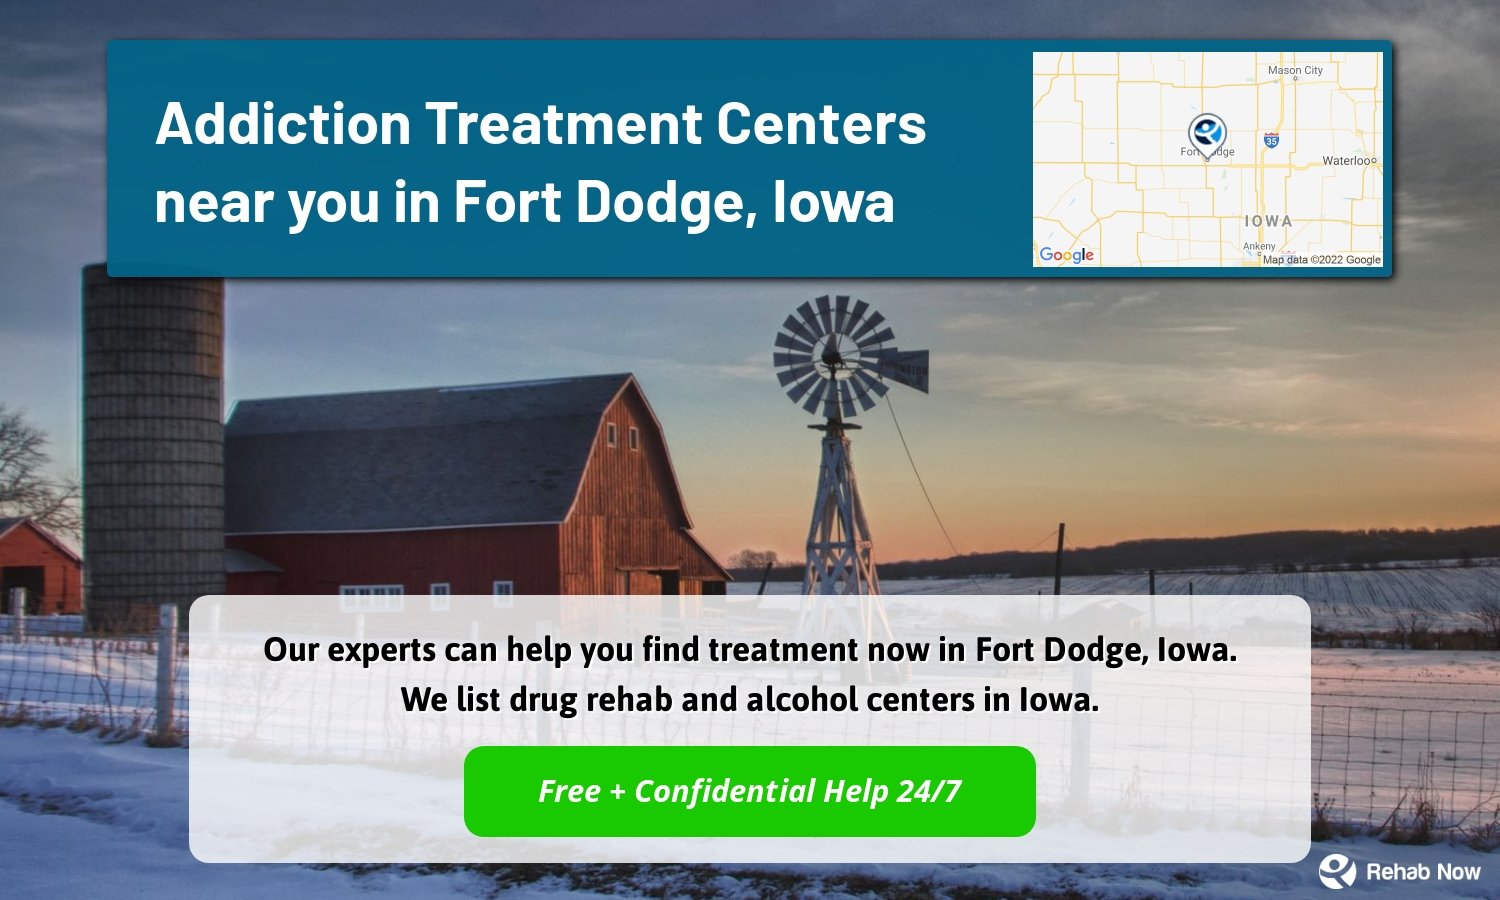 Our experts can help you find treatment now in Fort Dodge, Iowa. We list drug rehab and alcohol centers in Iowa.